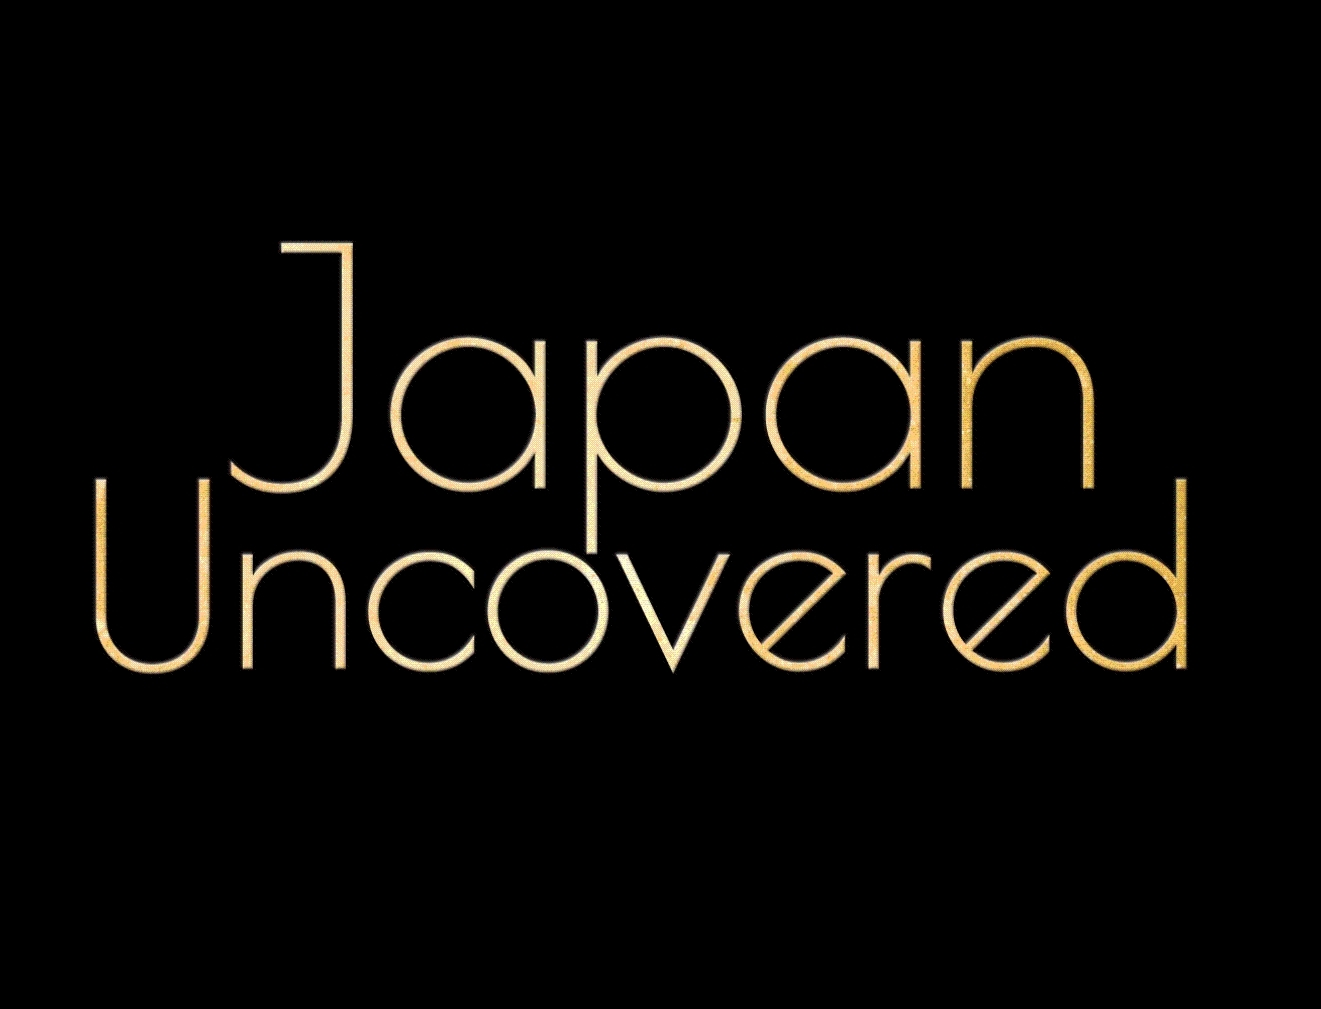 Japan Uncovered